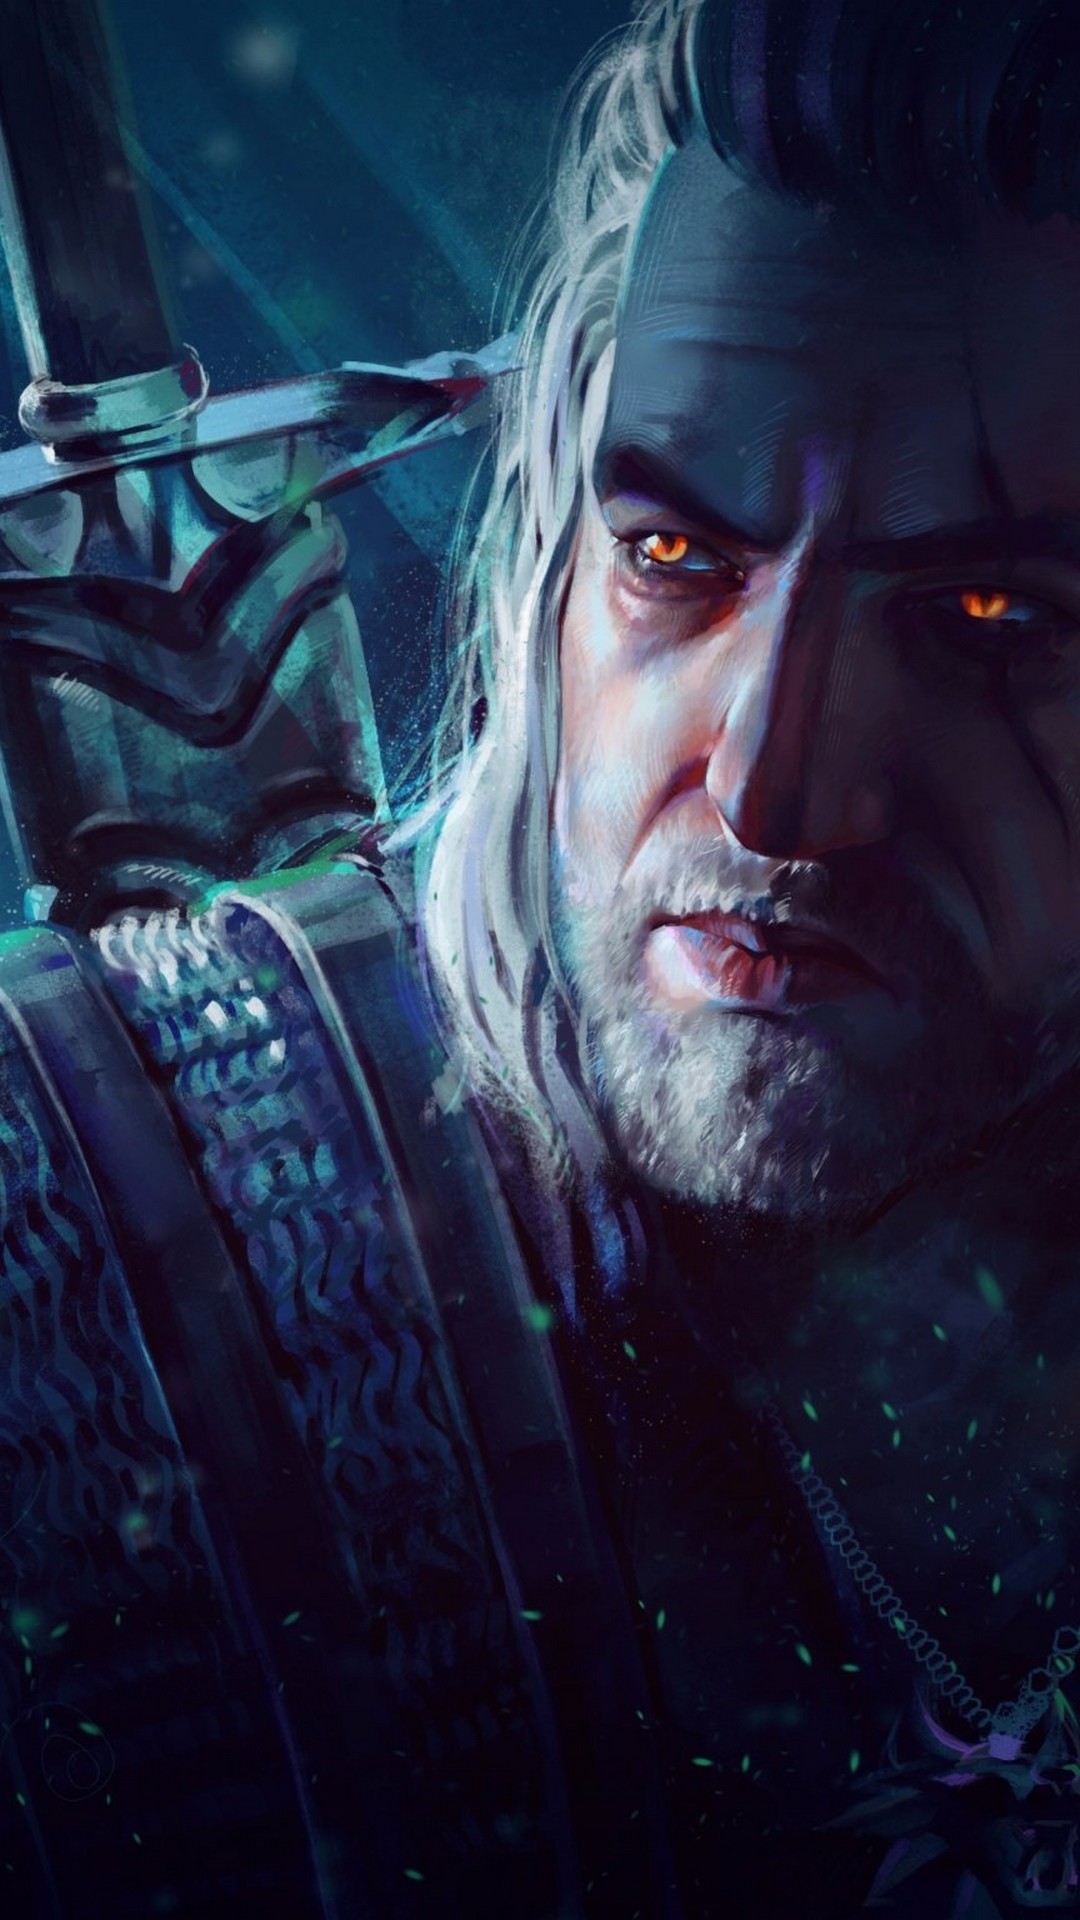 The Witcher i Phones Wallpaper with high-resolution 1080x1920 pixel. Download all Mobile Wallpapers and Use them as wallpapers for your iPhone, Tablet, iPad, Android and other mobile devices